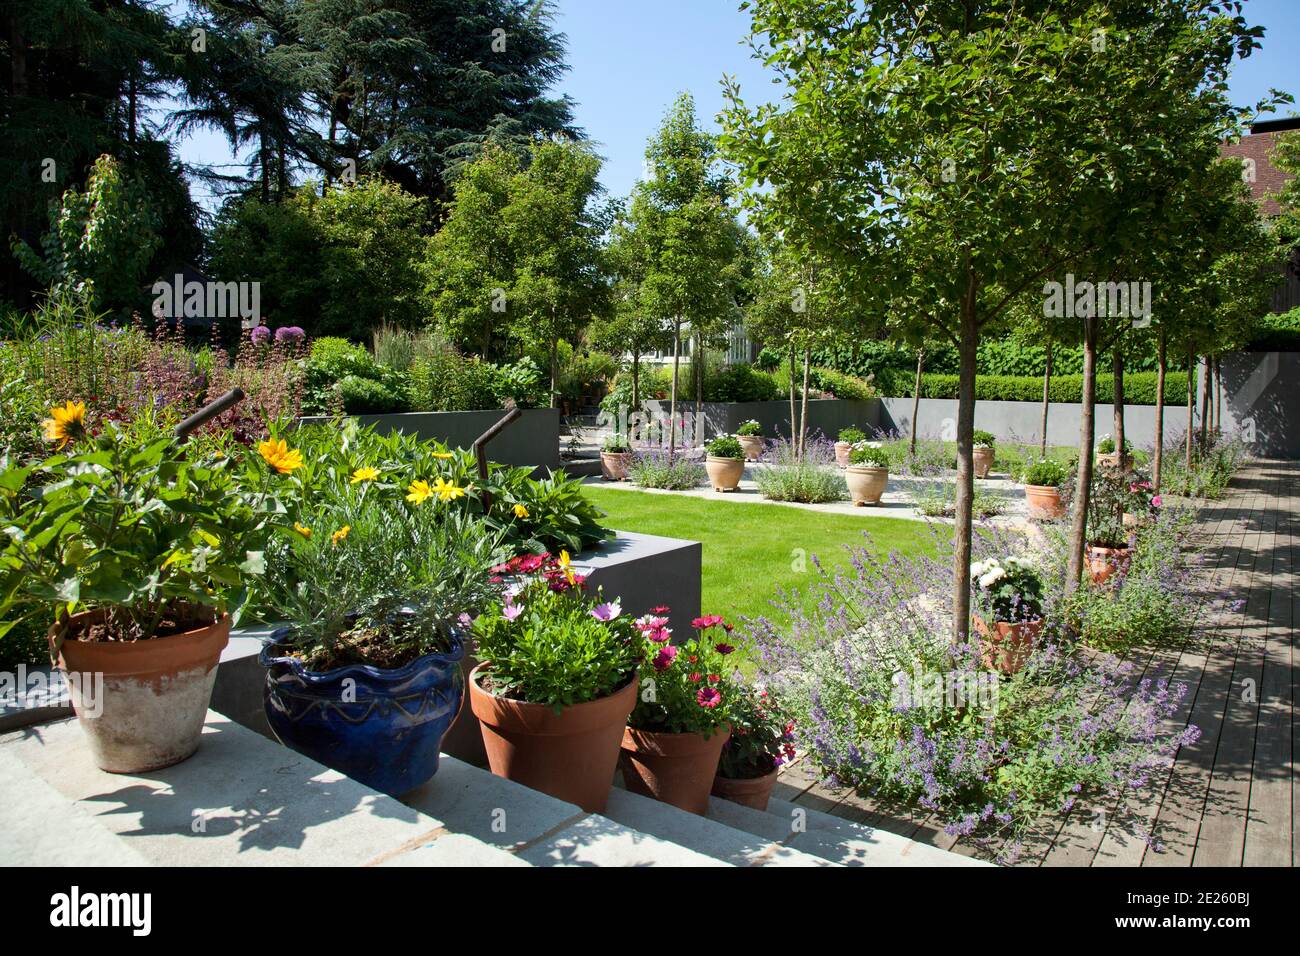 Garden with flower pots on steps, nepeta, lawn, wooden decking and small trees Stock Photo